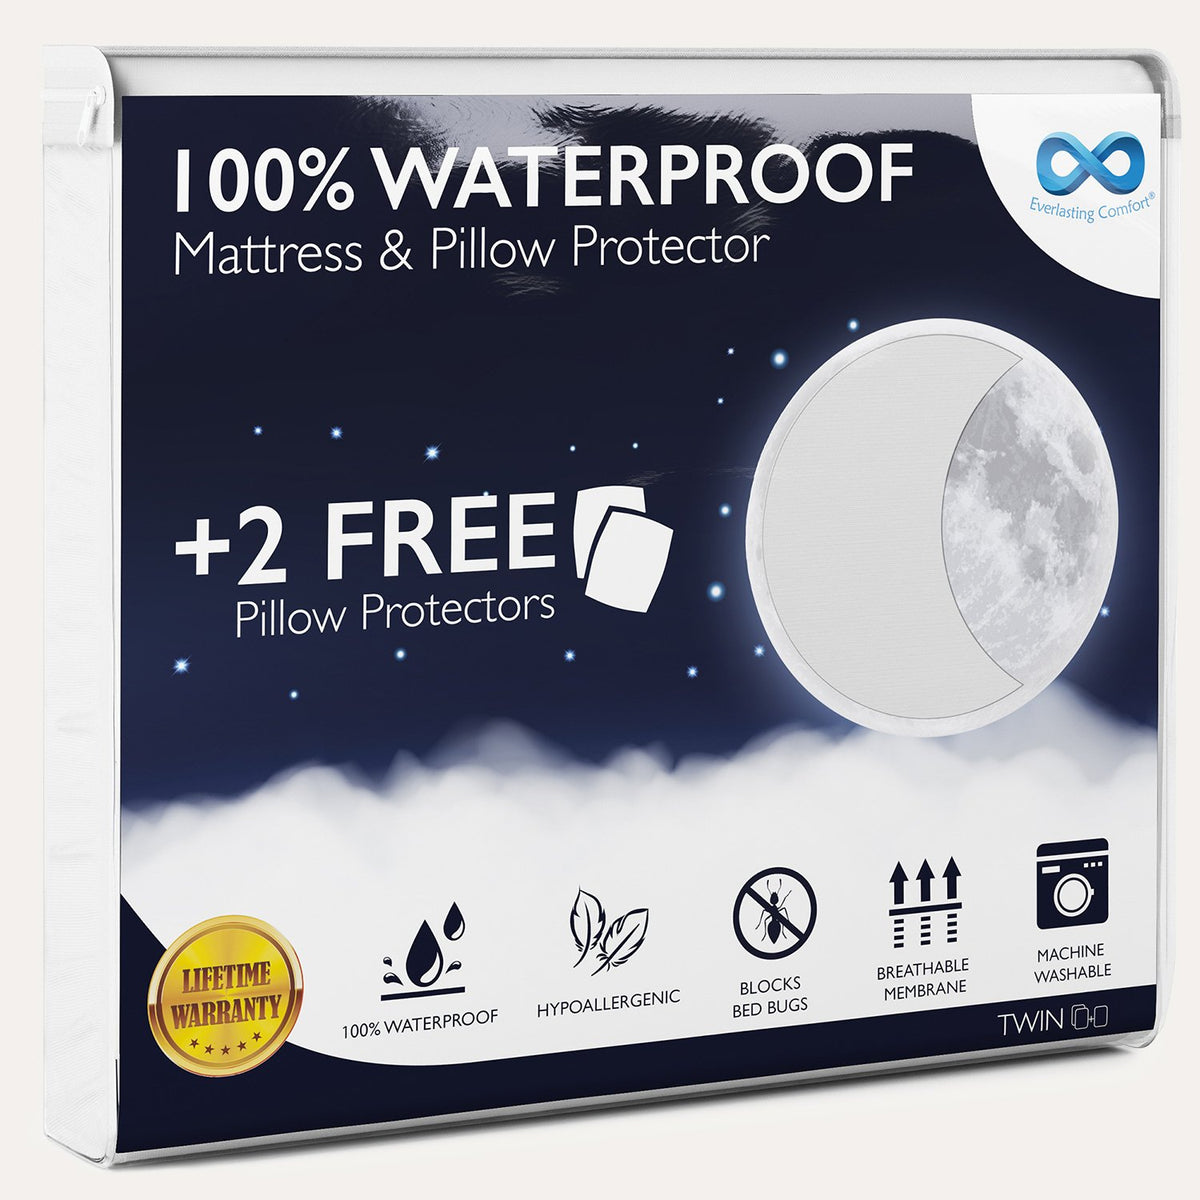 Everlasting Comfort 100% Waterproof Mattress Protector (Twin) and 1 Free Pillow Protector